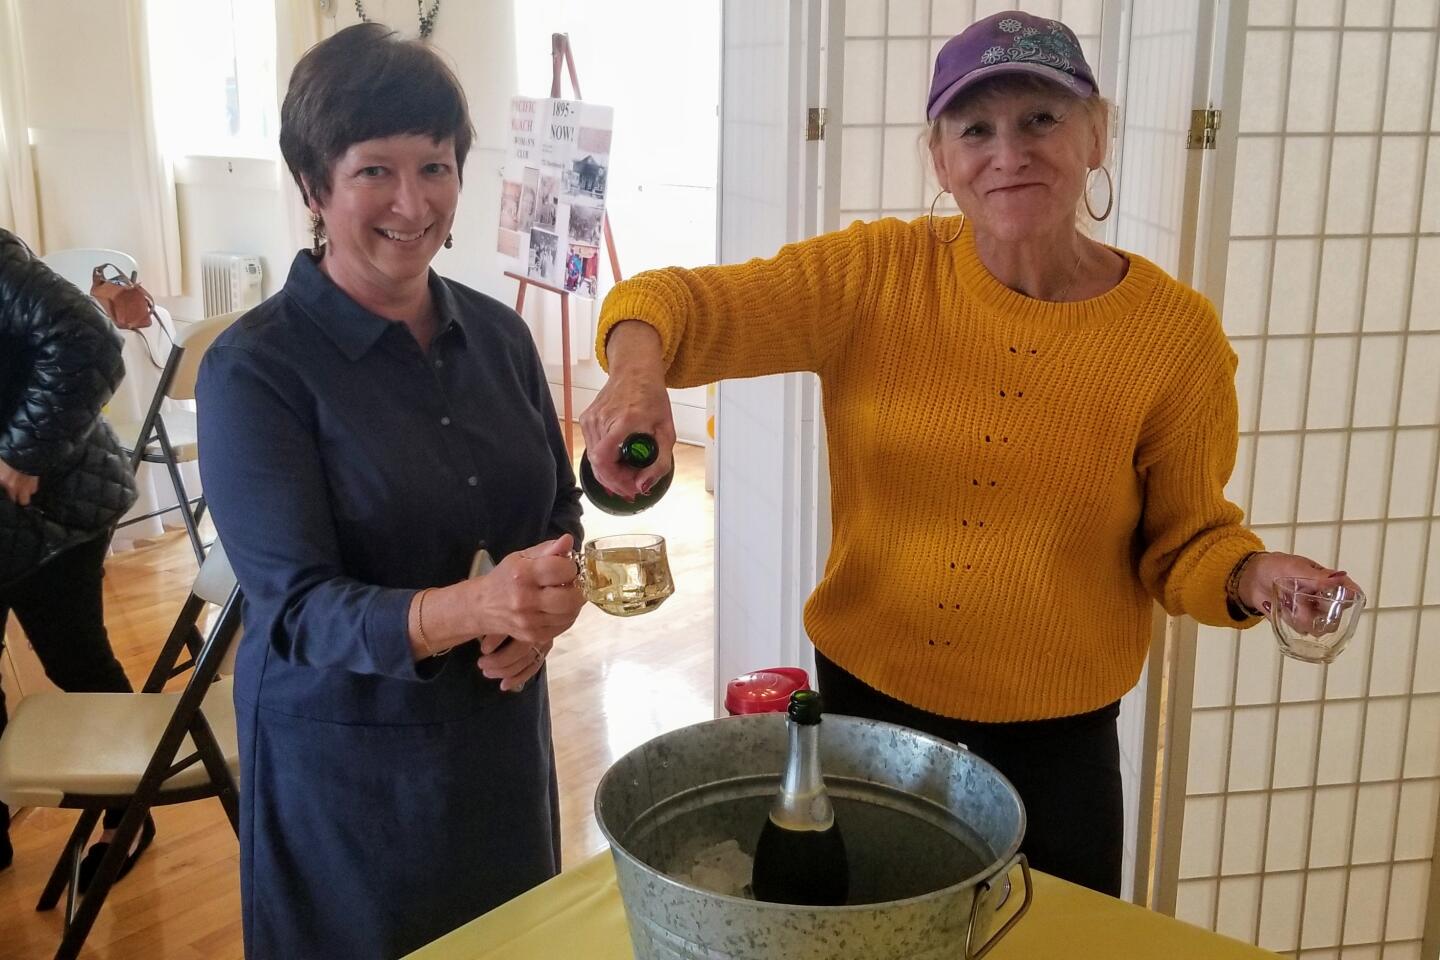 Liz Segre receives a glass of Champagne from past president of PB Woman’s Club Dianne Brittingham.